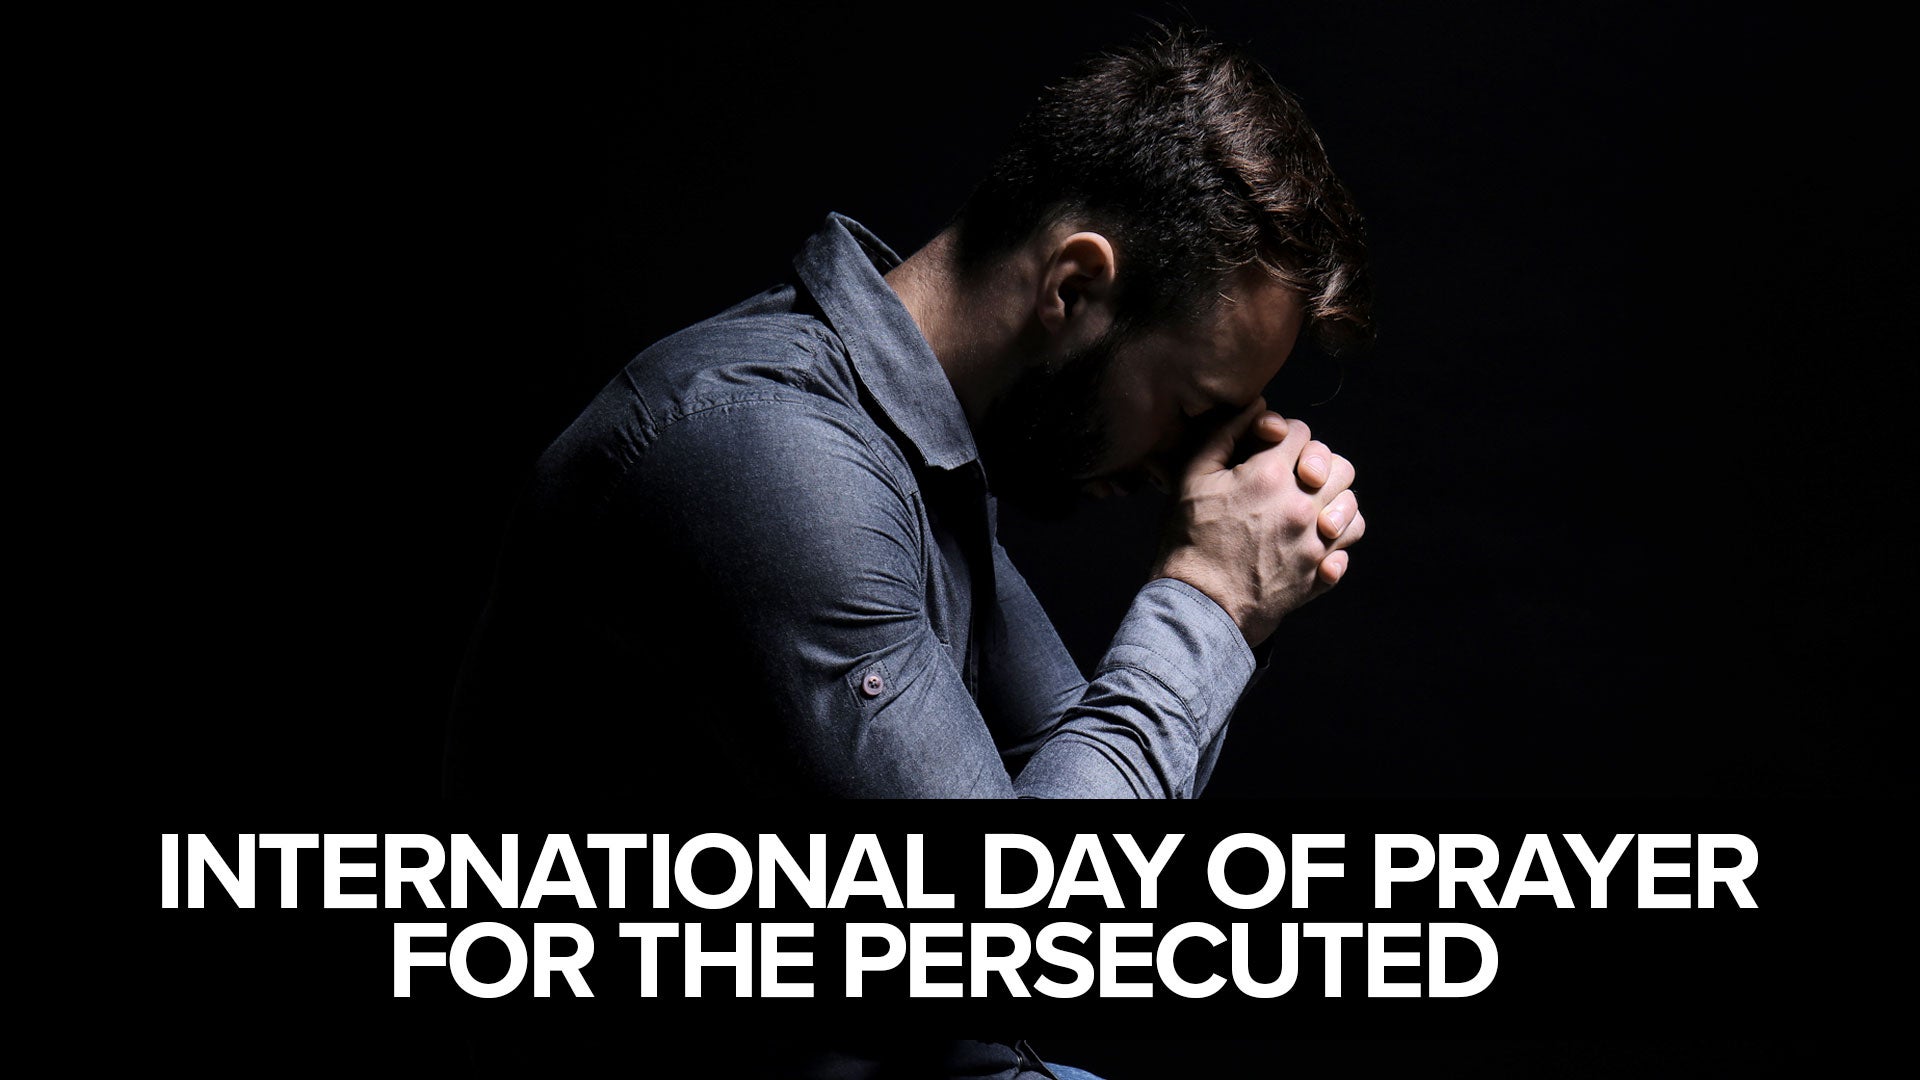 Join in the 'International Day of Prayer for the Persecuted' This Sunday